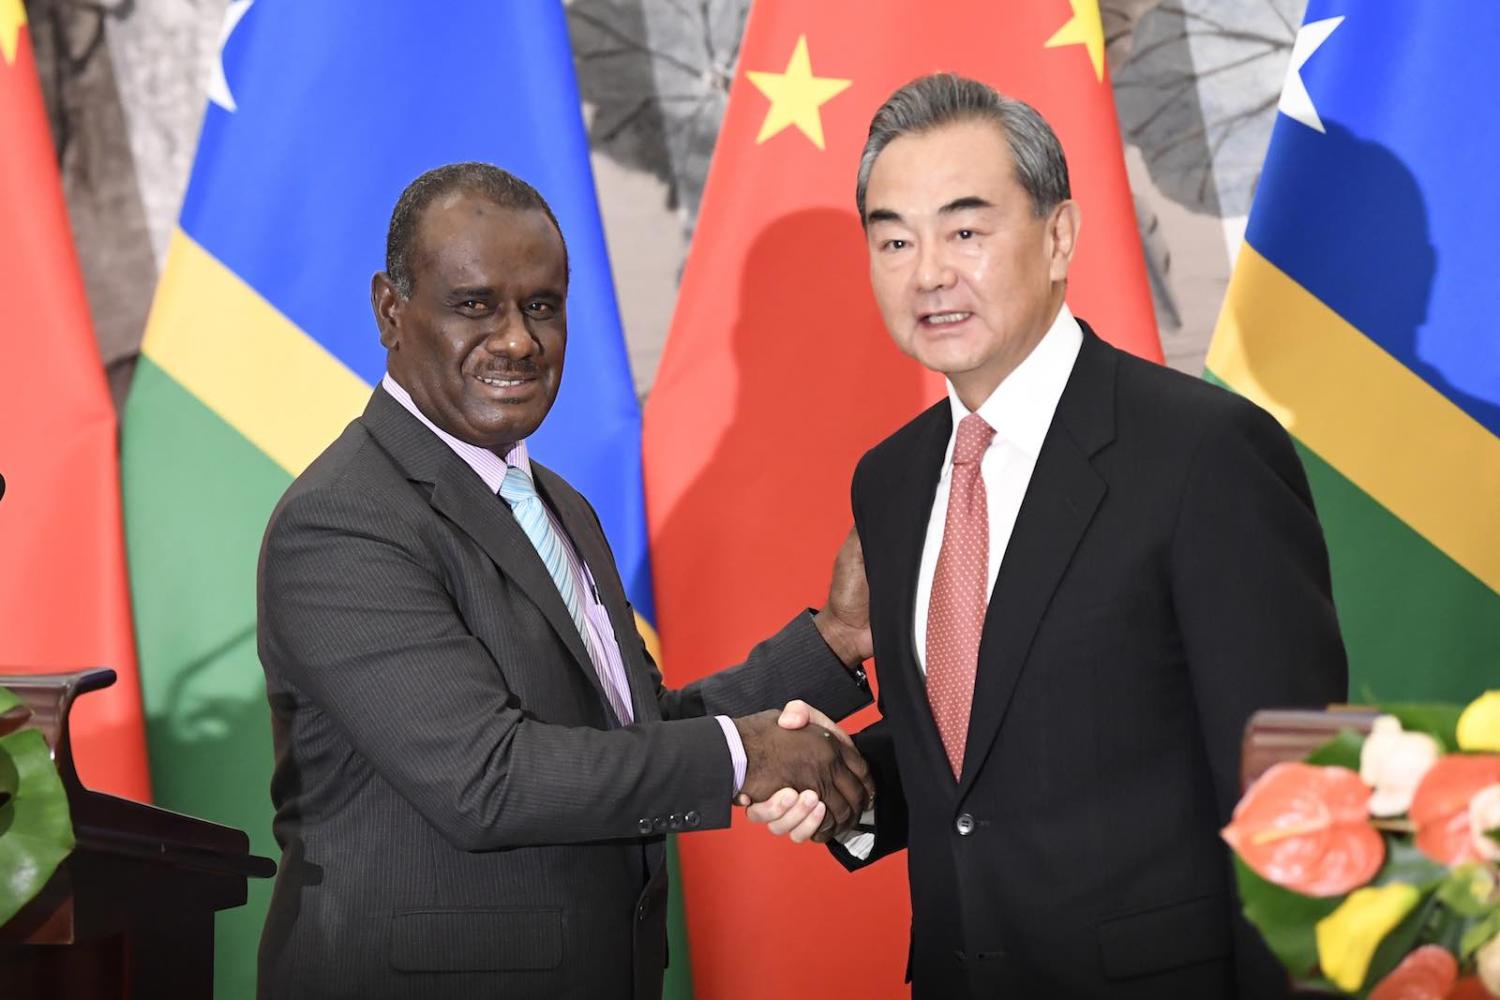 New friends: Solomon Islands Foreign Minister Jeremiah Manele (L) and Chinese Foreign Minister Wang Yi, on 21 September 2019 in Beijing (Photo: Naohiko Hatta via Getty)